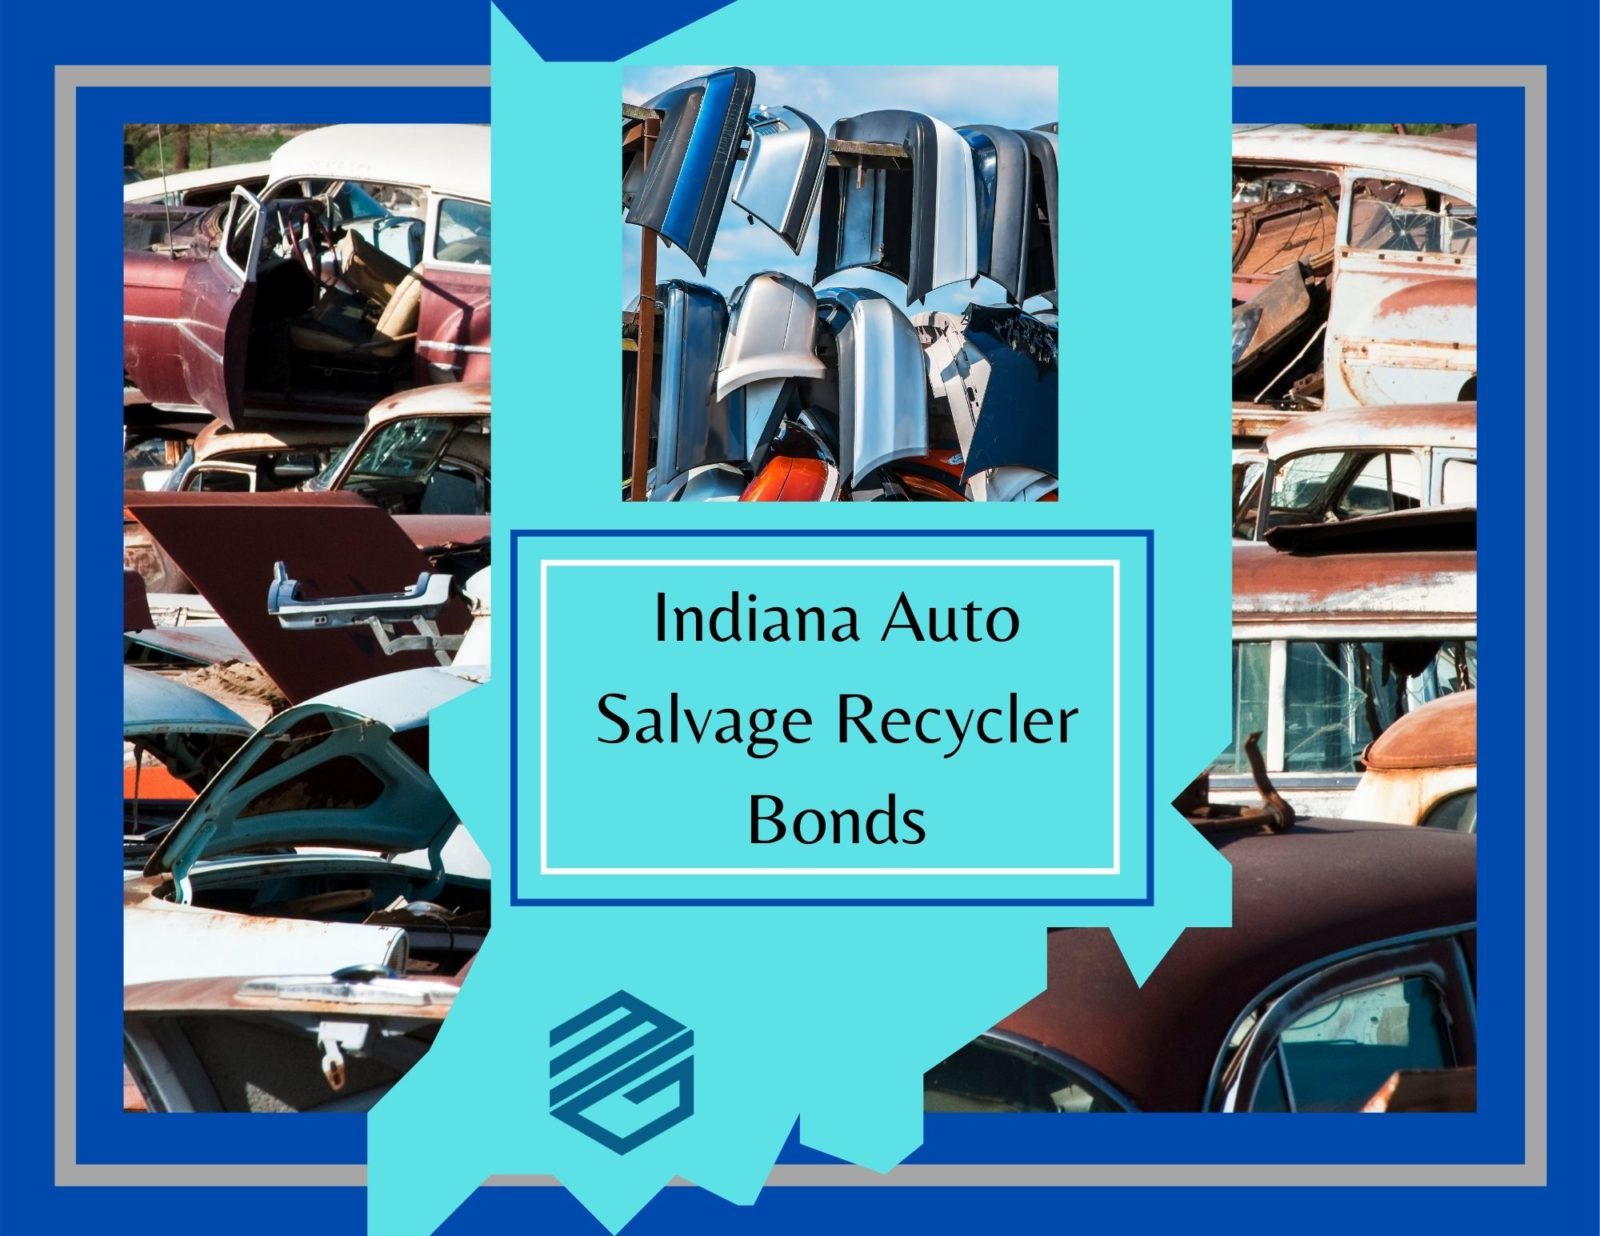 Indiana Salvage Recycler Surety Bond - A picture of the state of Indiana with a salvage car lot in the background. A text box reads, " Indiana Salvage Recycler Bonds".